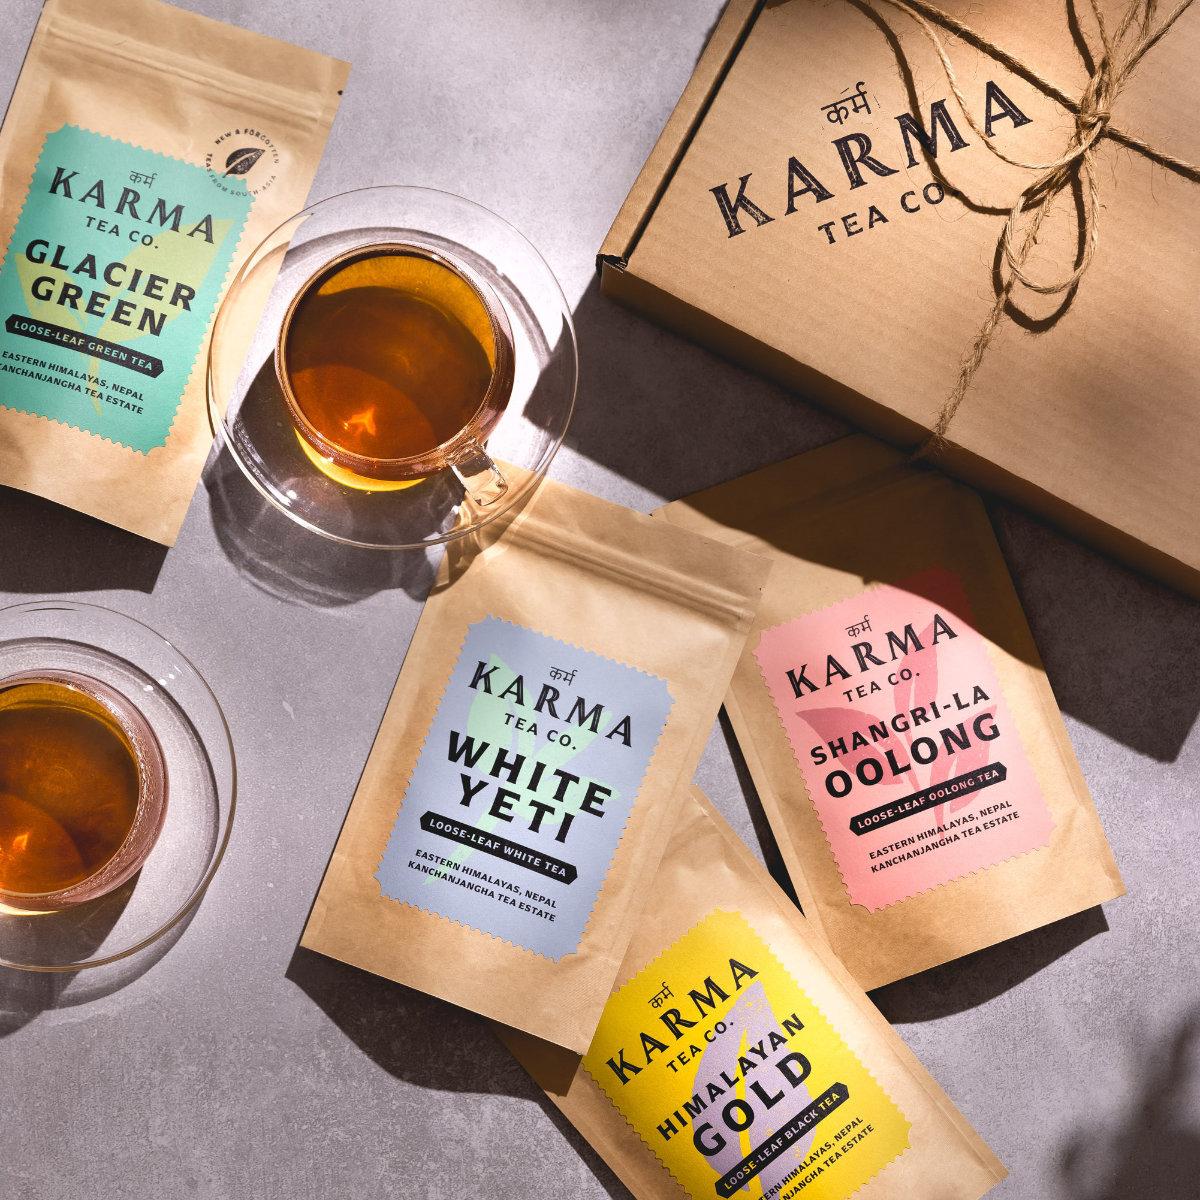 Bye bye boring brews Karma Tea Co stirs up a storm in a teacup Directly sourced to protect the makers Sustainable and single-origin Award-winning taste Karma Tea Co. is an independent, artisan tea company owned and run by British woman Alison Tran. Alison, 43 from London, turned her love for tea into a business by becoming a tea sommelier and sourcing sustainable, high quality teas from independent growers in India, Nepal and Sri Lanka. The company, which launched just prior to lockdown, now offers a range of 25 loose leaf tea varieties, all ethically sourced, including: Silk Cloud: light and delicate with spring floral notes, a sugar cane sweetness and a hint of dark chocolate (£8 for 35g – 29p per cup). Winner of Great Taste award White Yeti: a smooth white-style tea with notes of vanilla, spring blossoms and fresh butter (£8 for 25g – 40p per cup). Winner of Great Taste award Black Tea and Mango: a smooth, slightly creamy taste with rich fruitiness (£6.99 for 35g – 21p per cup) Forest Noir: bright and sweet, with aromas of rose and honeysuckle (£8 for 35g – 29p per cup) And of course New Day Assam: how breakfast tea is meant to taste! A rich, malty, and full-bodied enough to be drunk with milk (£6.50 for 40g – 40p per cup) Esha (Earl) Grey: combines black tea from the highlands of Sri Lanka with real bergamot essential oil from fruits grown around the Mediterranean. Bright, zesty and a breath of fresh air. (£6.50 for 40g – 40p per cup) “Despite tea playing such a big part in our culture, most Brits don’t know a great deal about the provenance or quality of the product they’re drinking. Lots of people actually think tea comes from Yorkshire! ” says Alison. “Whereas there has been a lot of interest in how and where coffee and chocolate is produced, tea seems to have somehow fallen down the cracks and is still viewed as a commodity. This means the legacy of the colonial past has been allowed to continue, with some tea estates being paid very little for their product. There needs to be a lot more awareness of and appreciation for that cup of tea that many of us enjoy every day but take for granted.” All Karma Tea Co. teas: Are suitable for vegans Are grown organically by tea growers committed to sustainable agricultural practices Contain half the amount of caffeine or less than a cup of coffee (some are caffeine-free) Contain no artificial or ‘natural’ flavouring – just 100% real ingredients Stockist: Available to buy directly at karmateaco.com